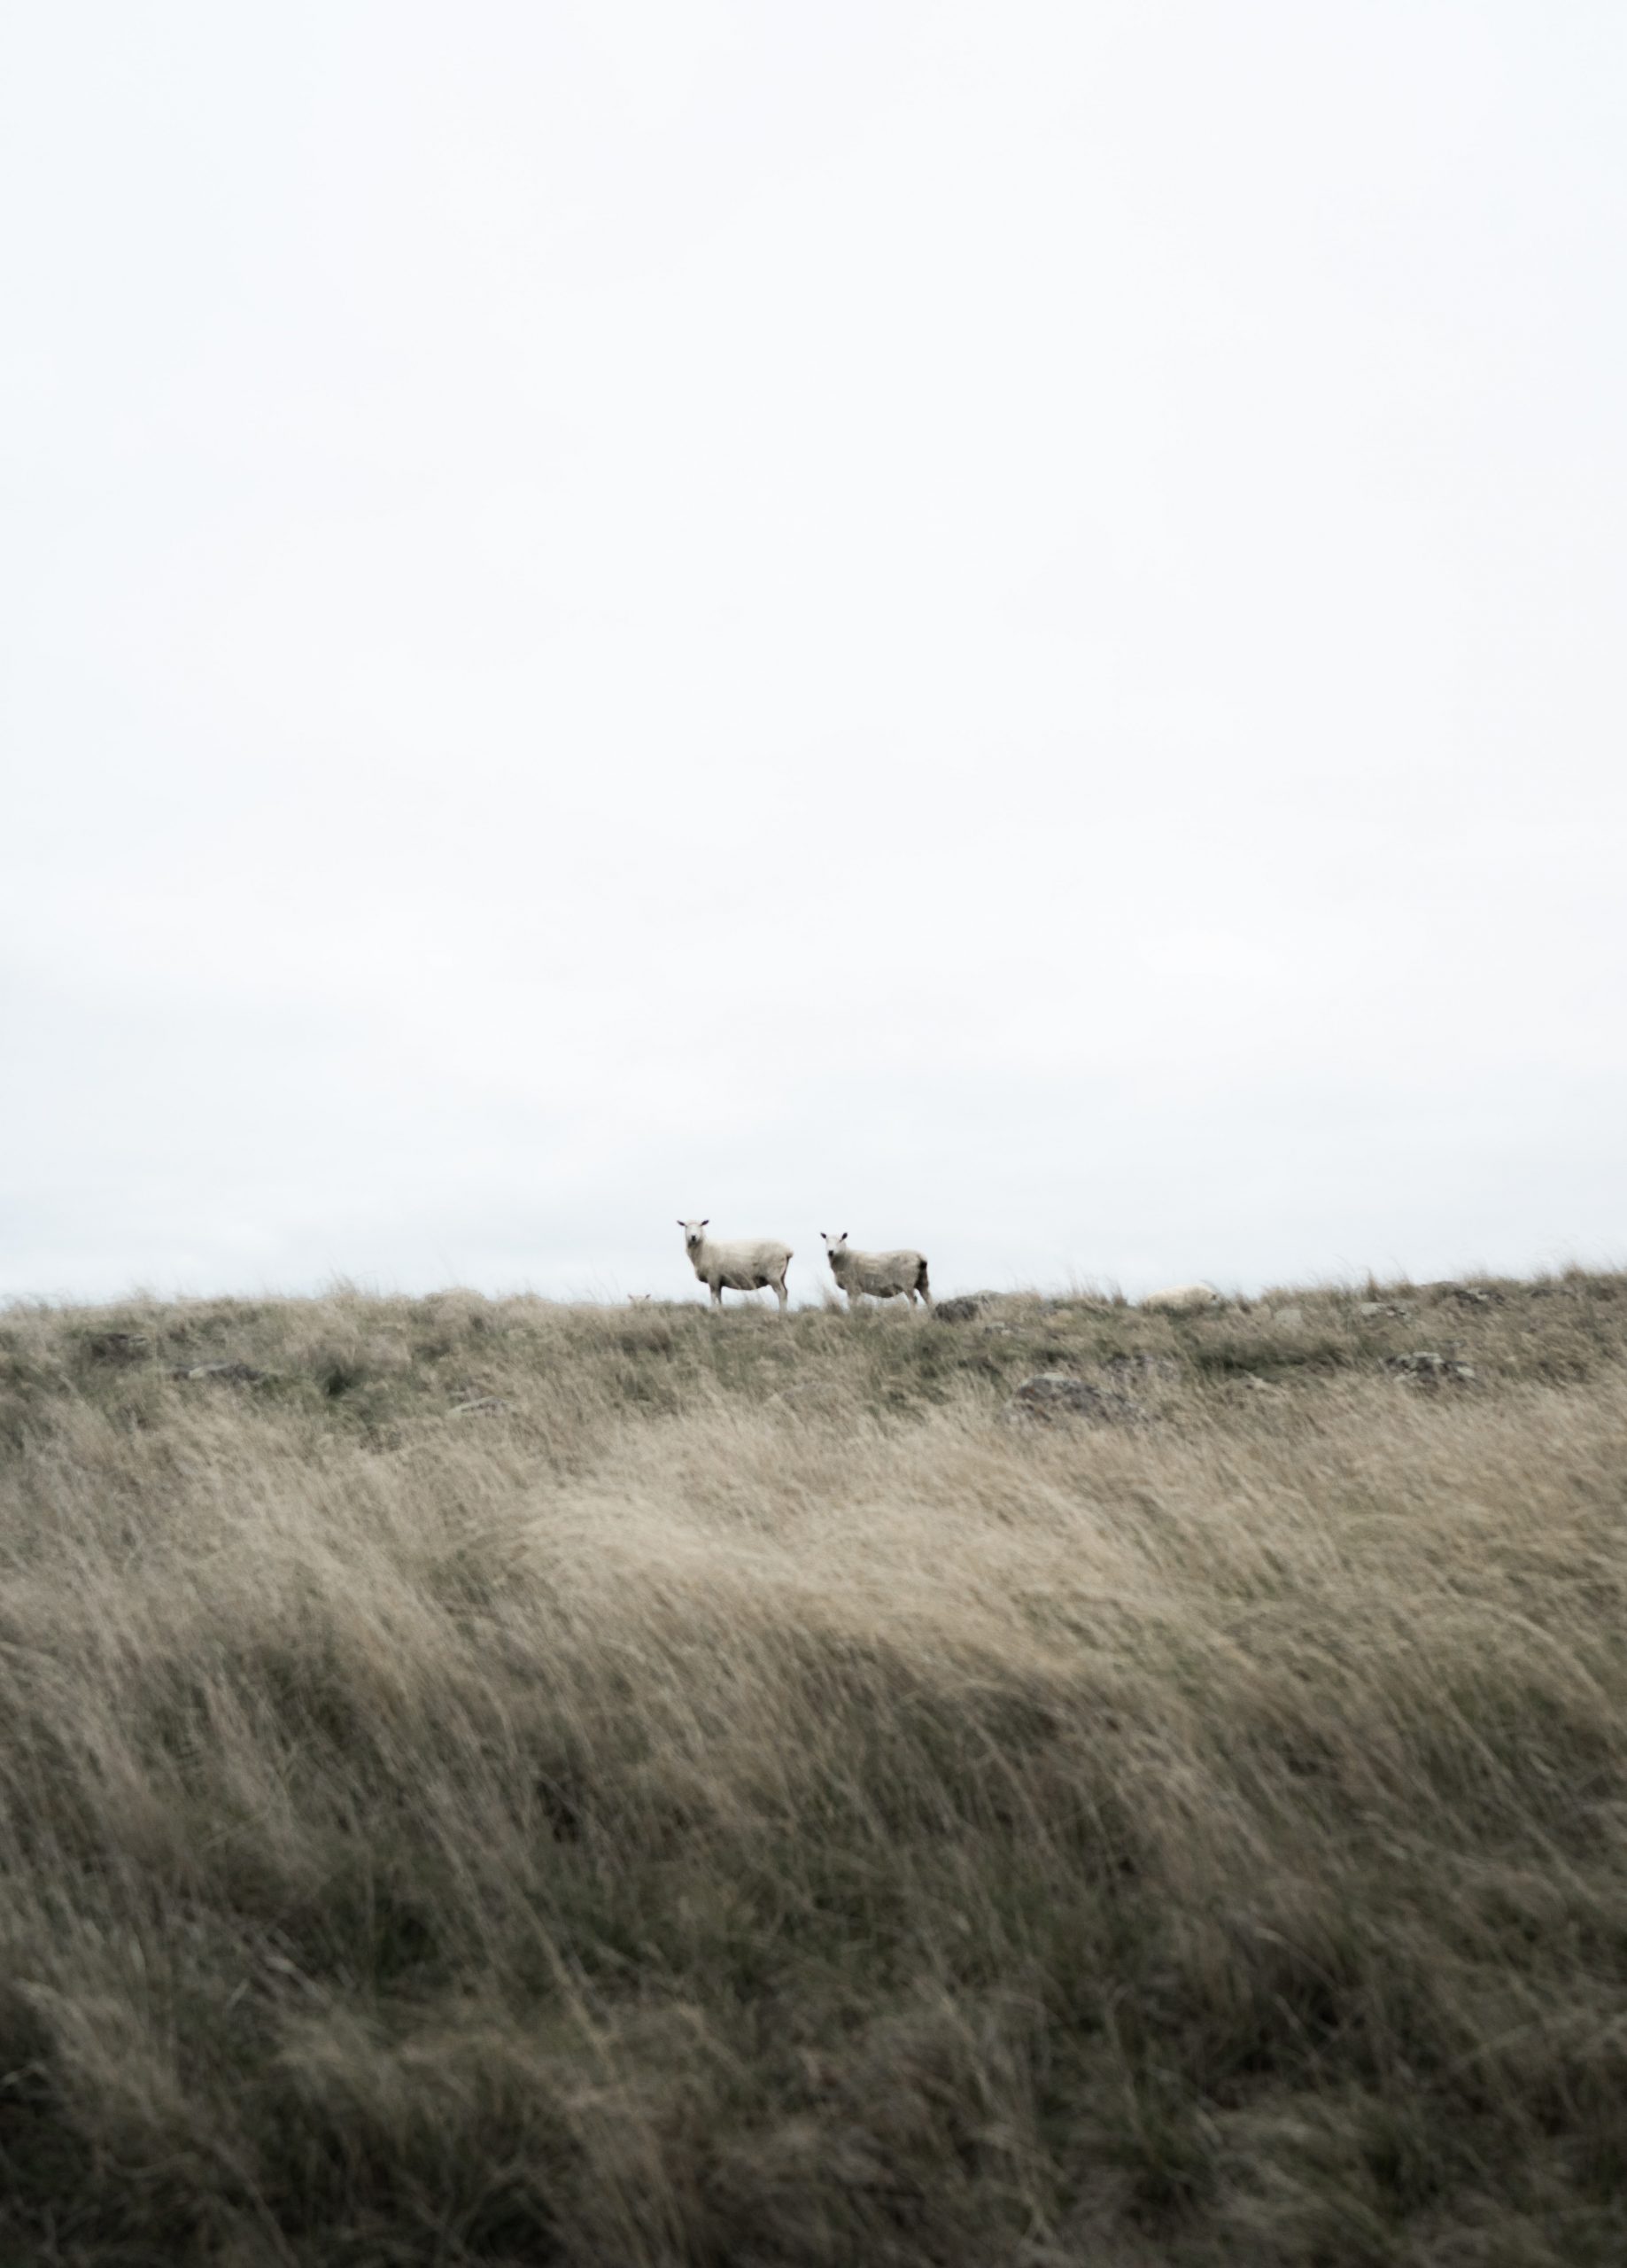 Two white sheep on a field, staring at the camera.